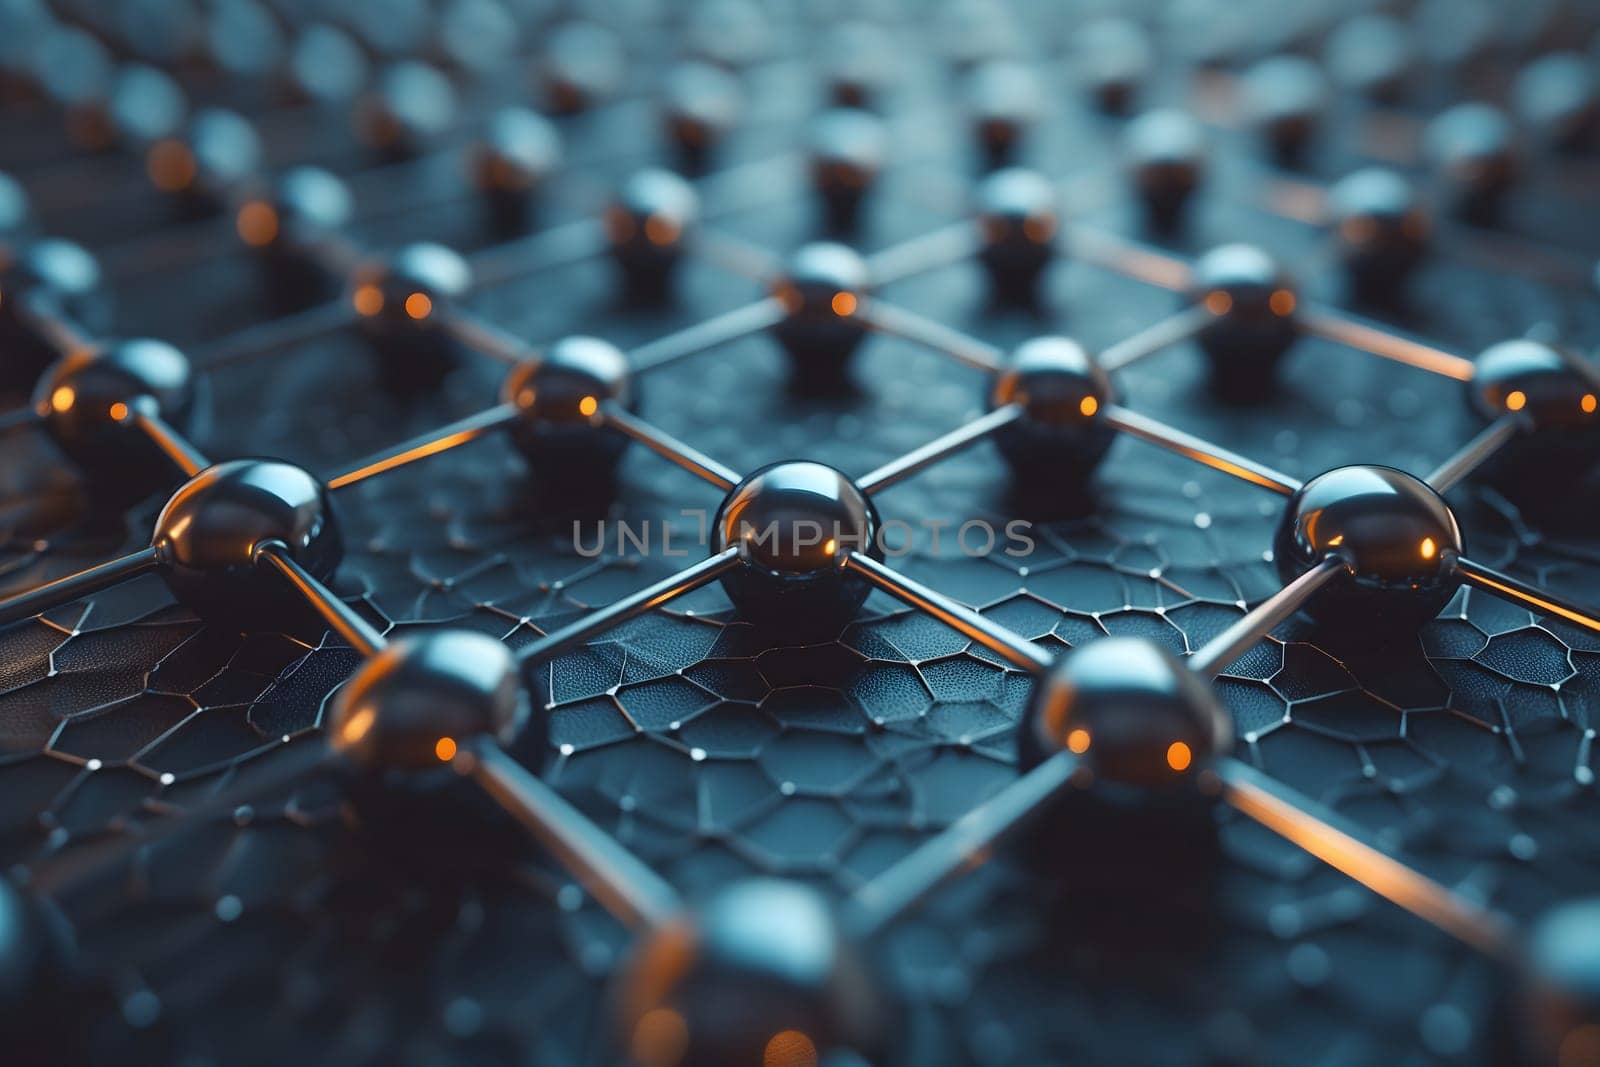 Hexagonal grid pattern of molecular structure of Graphene. Neural network generated image. Not based on any actual scene or pattern.